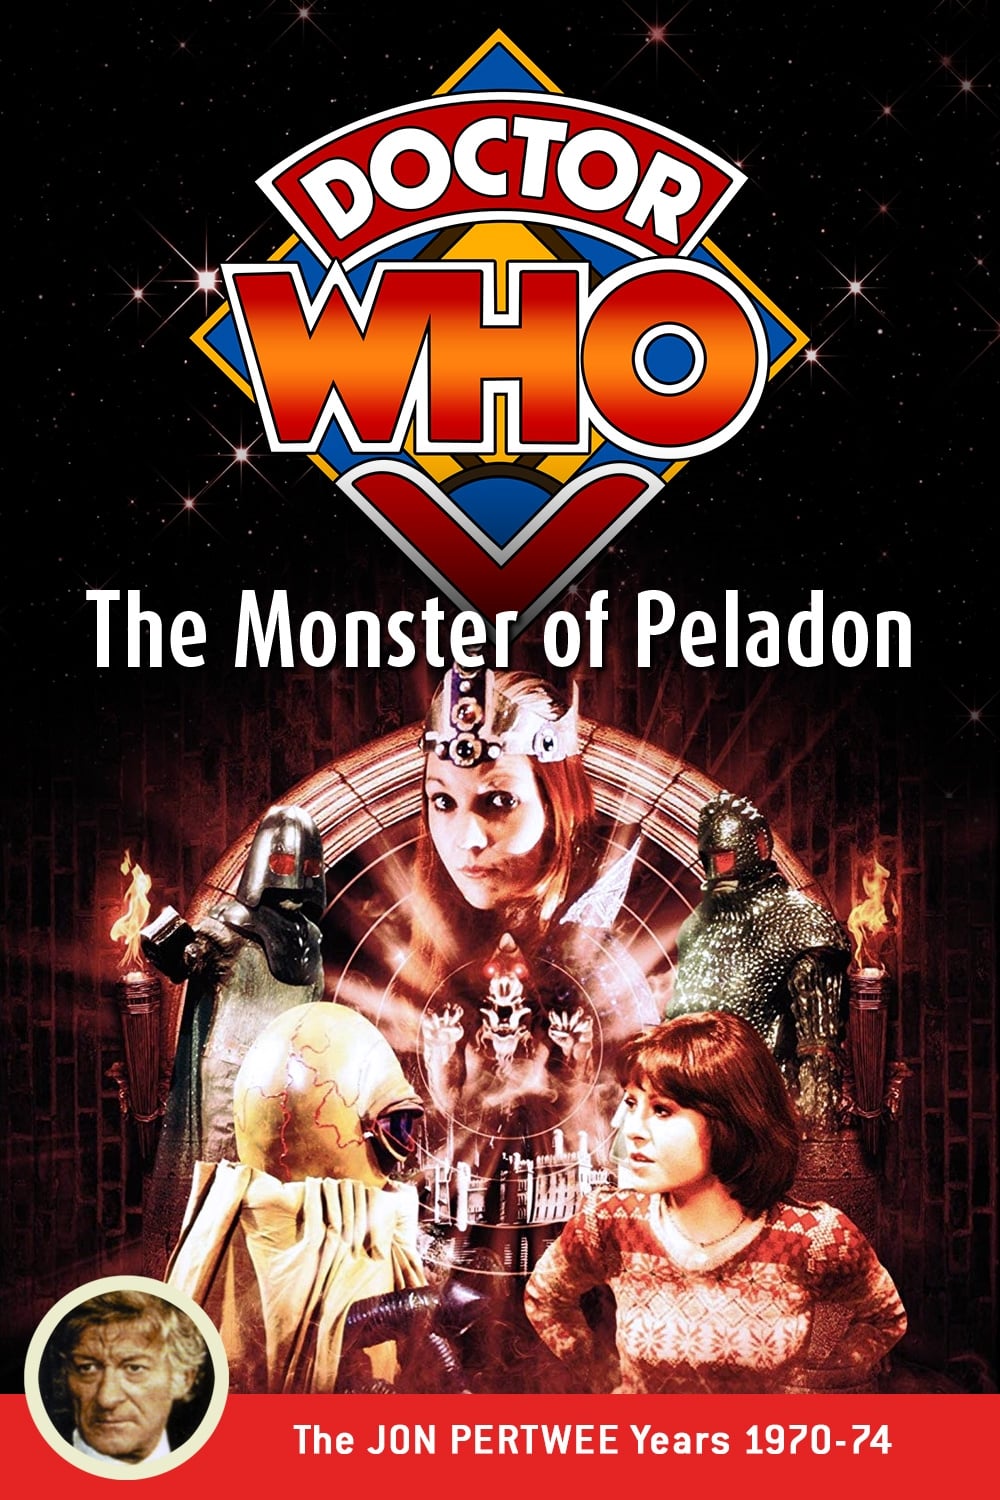 Doctor Who: The Monster of Peladon (1974)